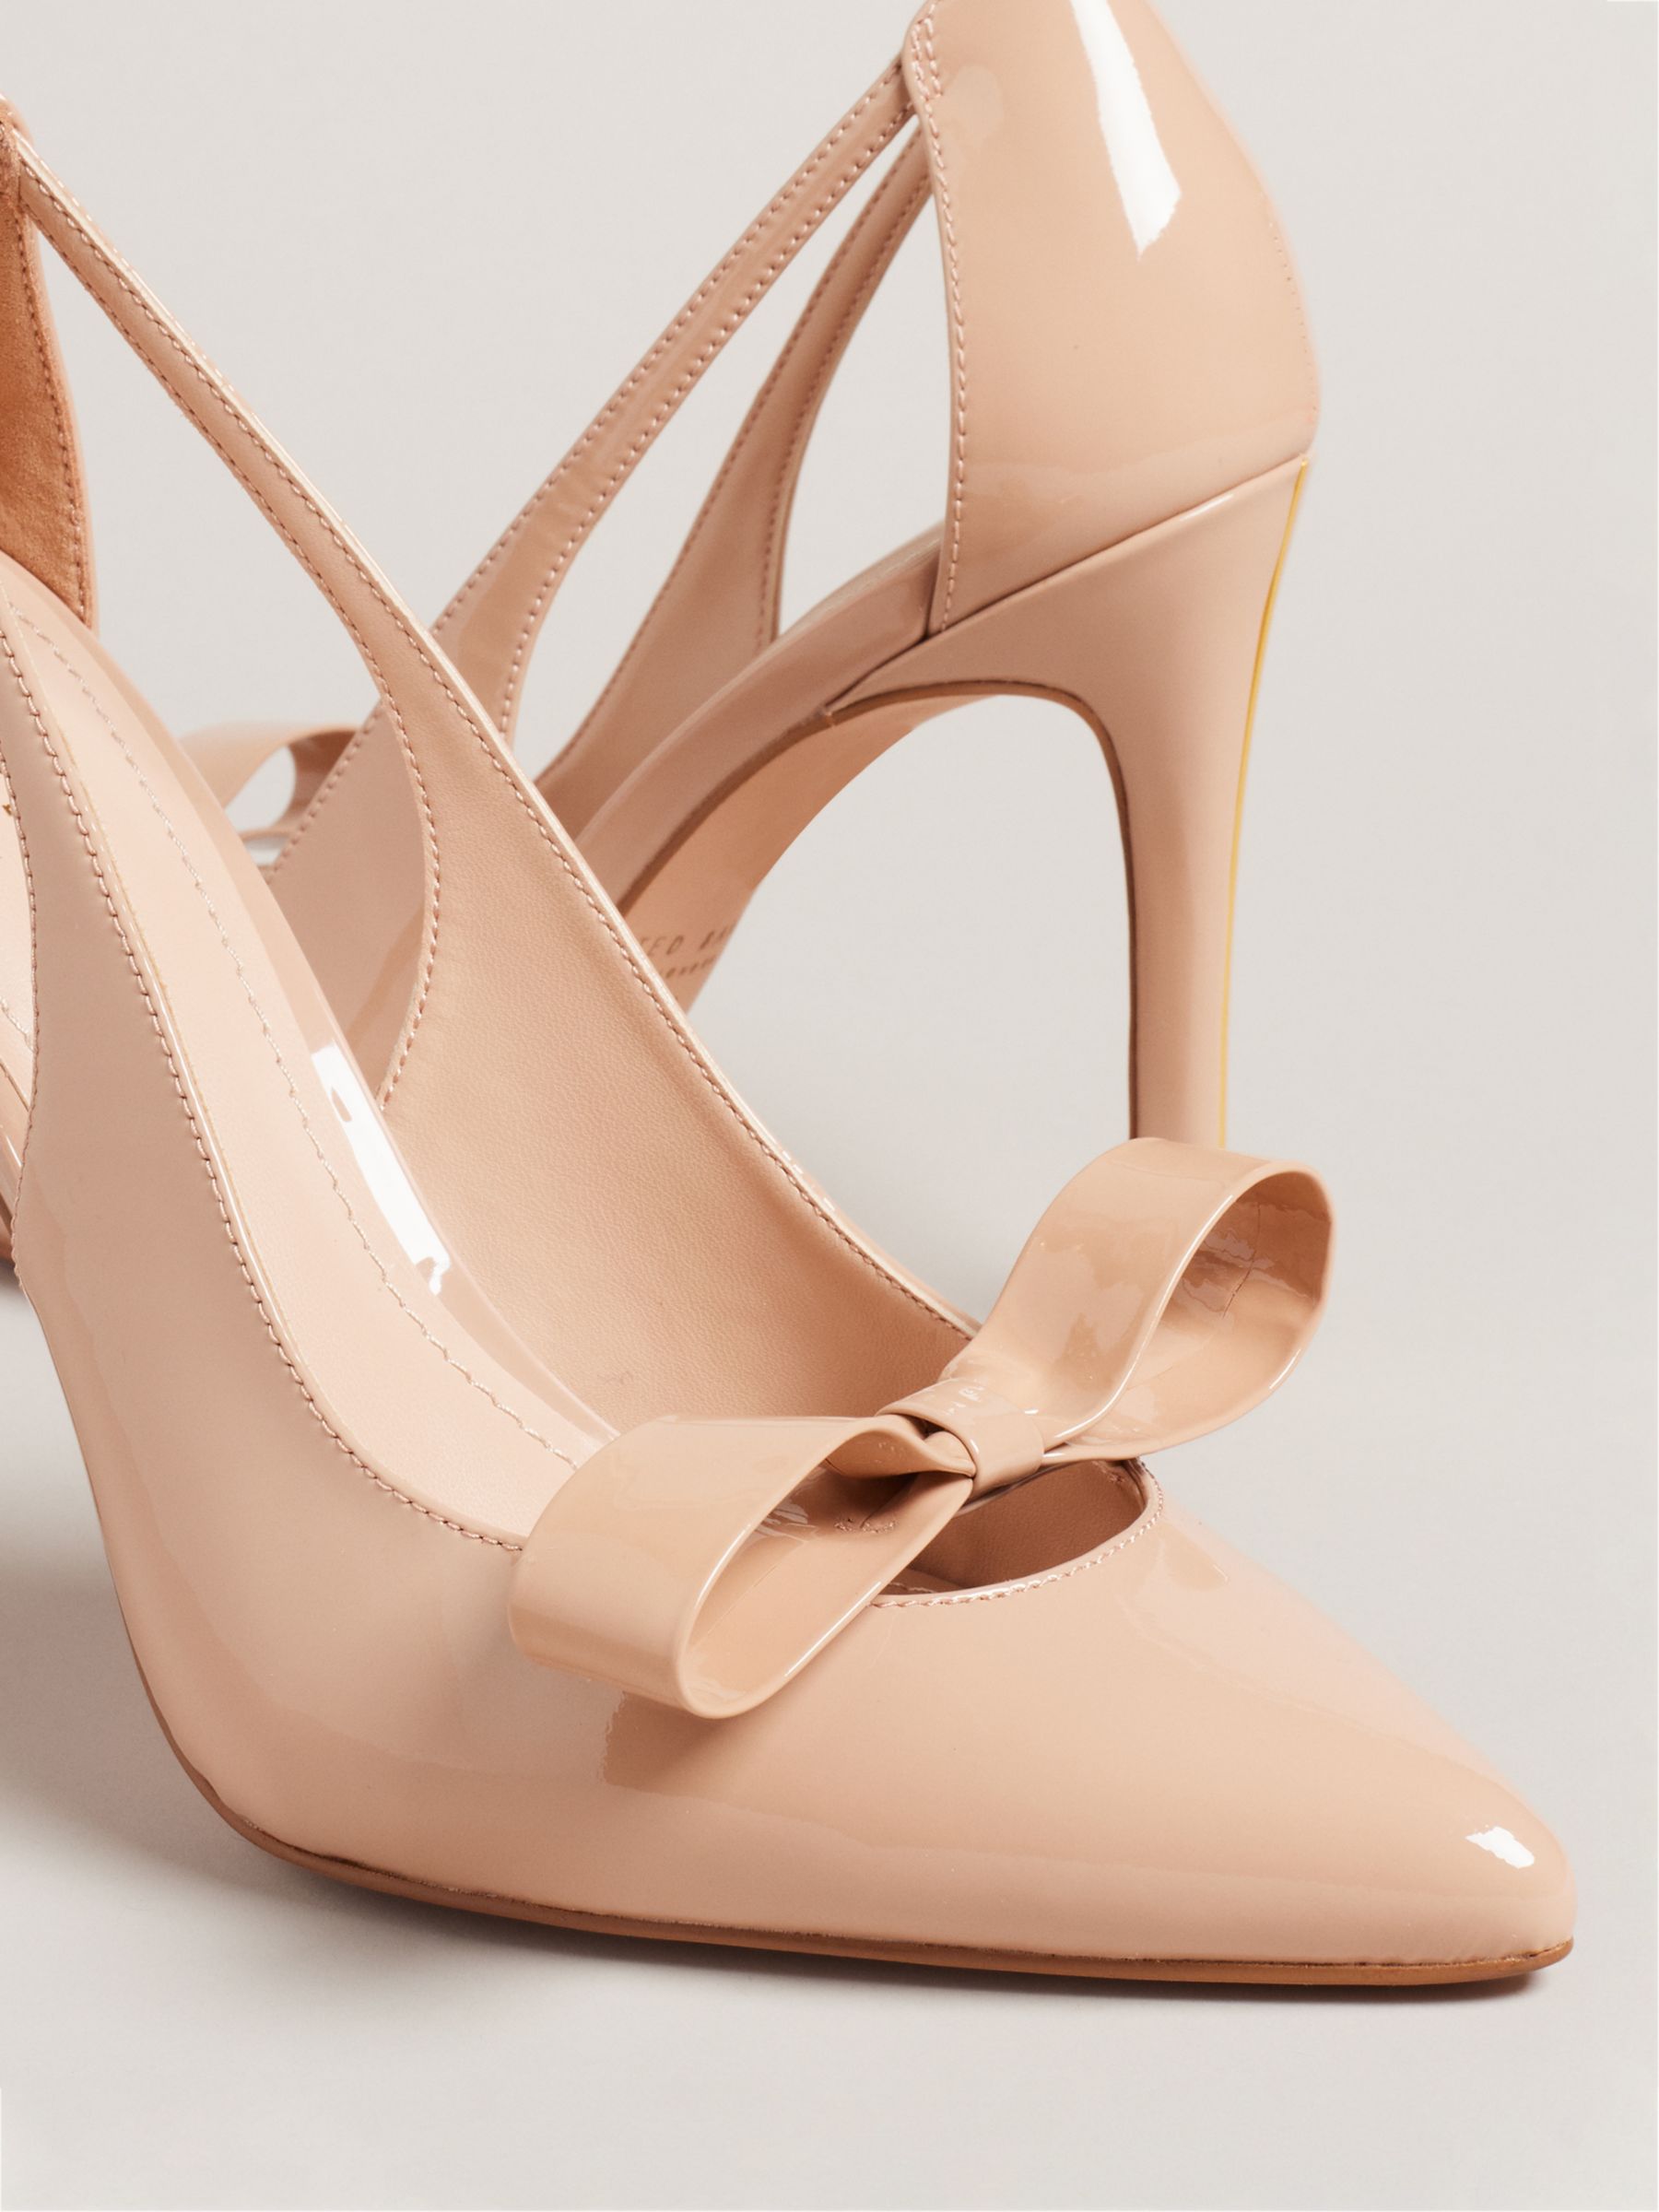 Ted Baker Orliney Patent Bow Cut Out Heeled Court Shoes, Nude, EU37